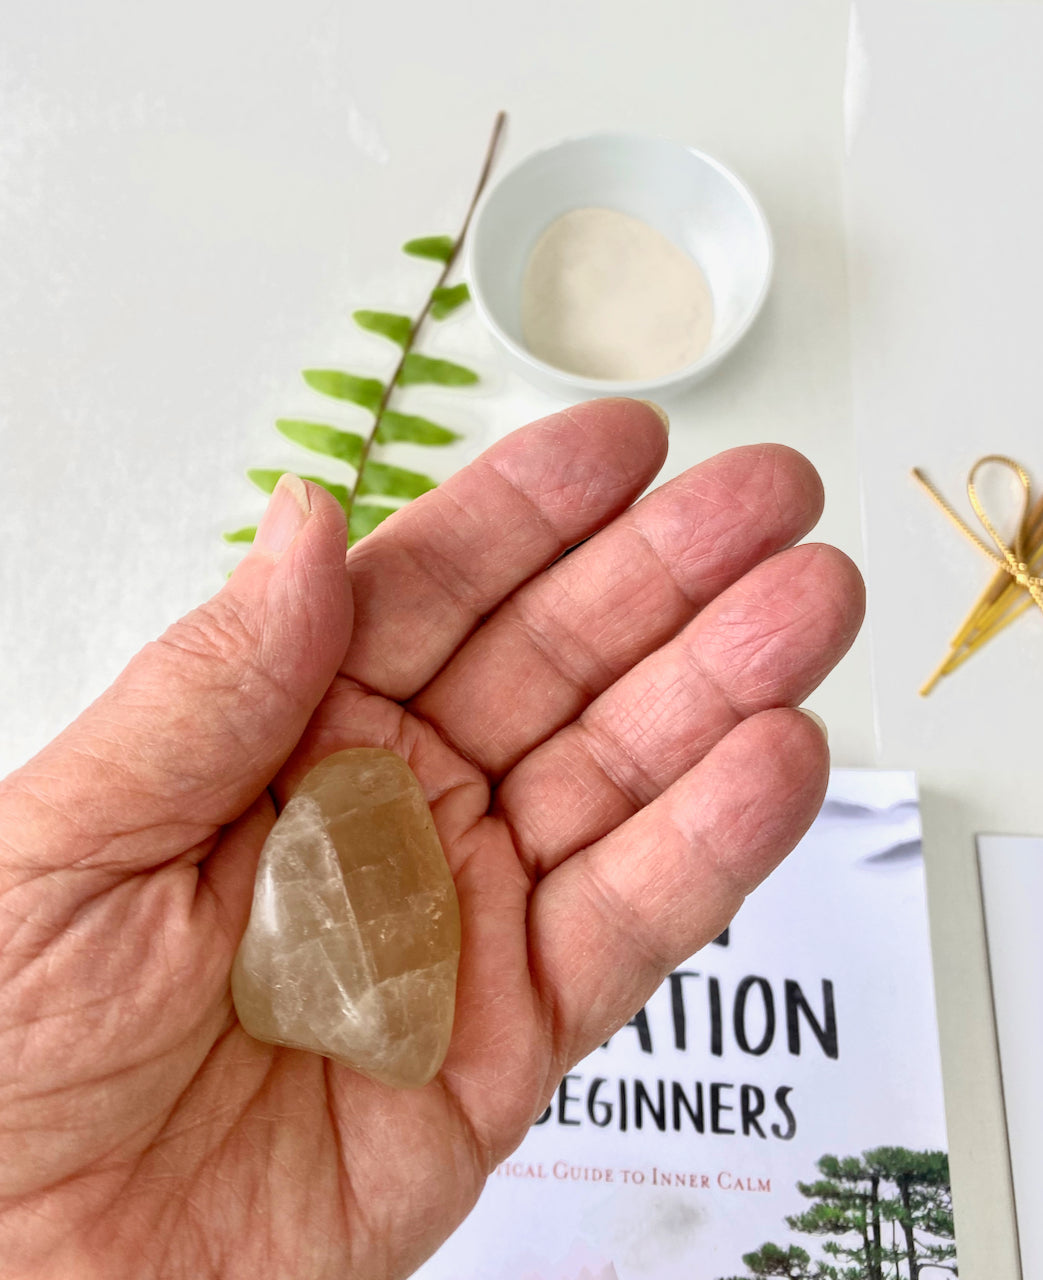 Sumi “Three Palm Stones” Crystals Spirituality and Meditation Bundle by Marilyn Wells